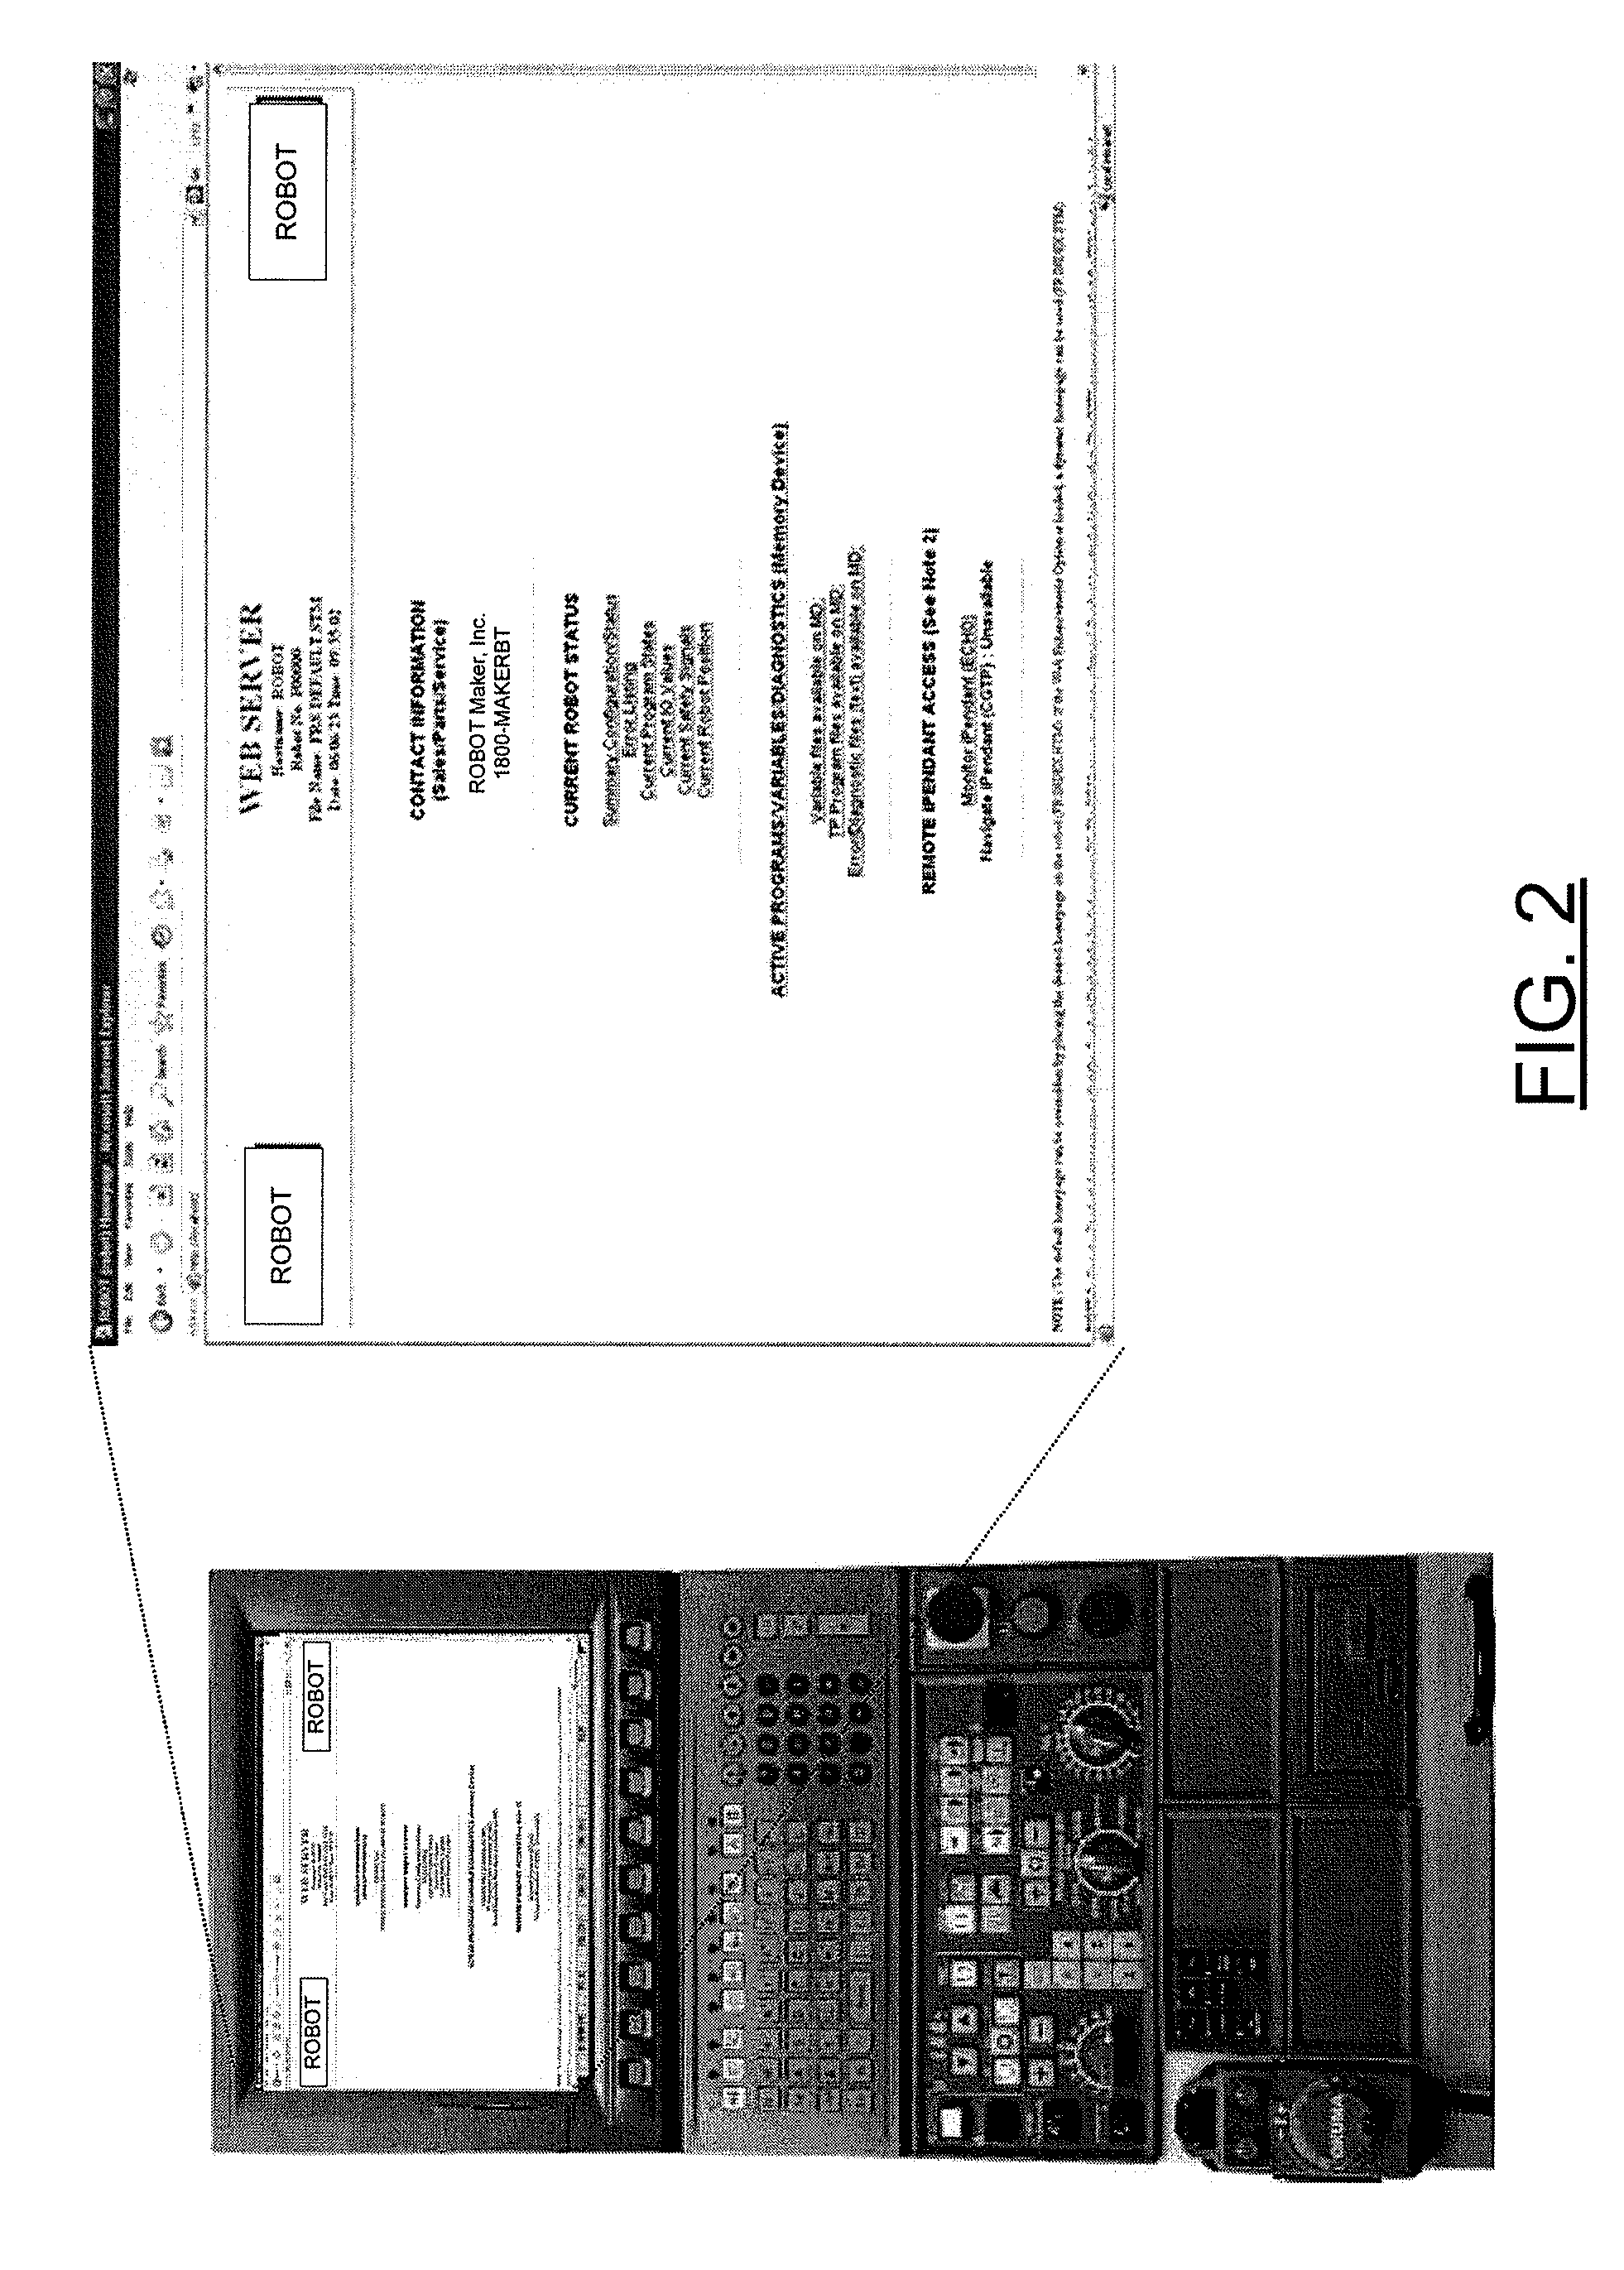 System, Methods, Apparatuses and Computer Program Products for Use on a Machine Tool Controller